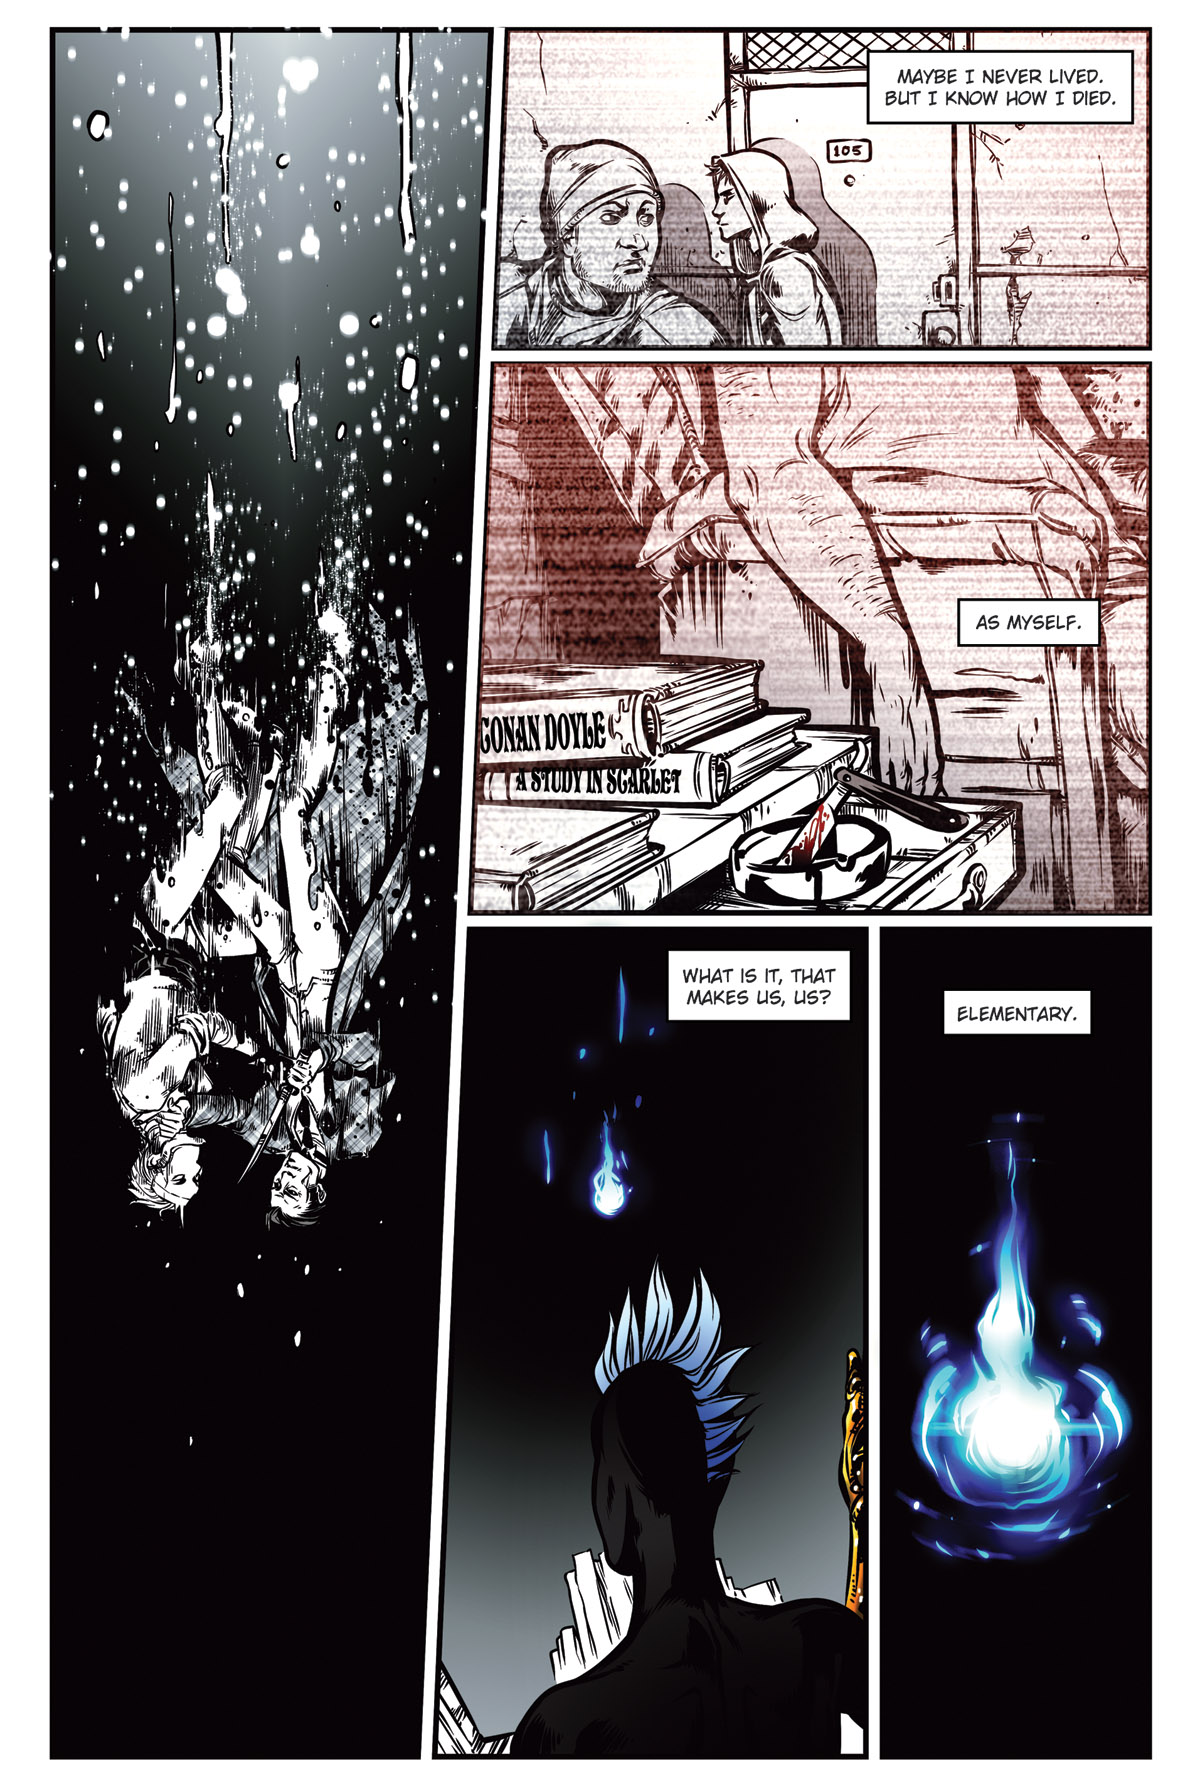 Afterlife Inc. | Elementary | Page 10